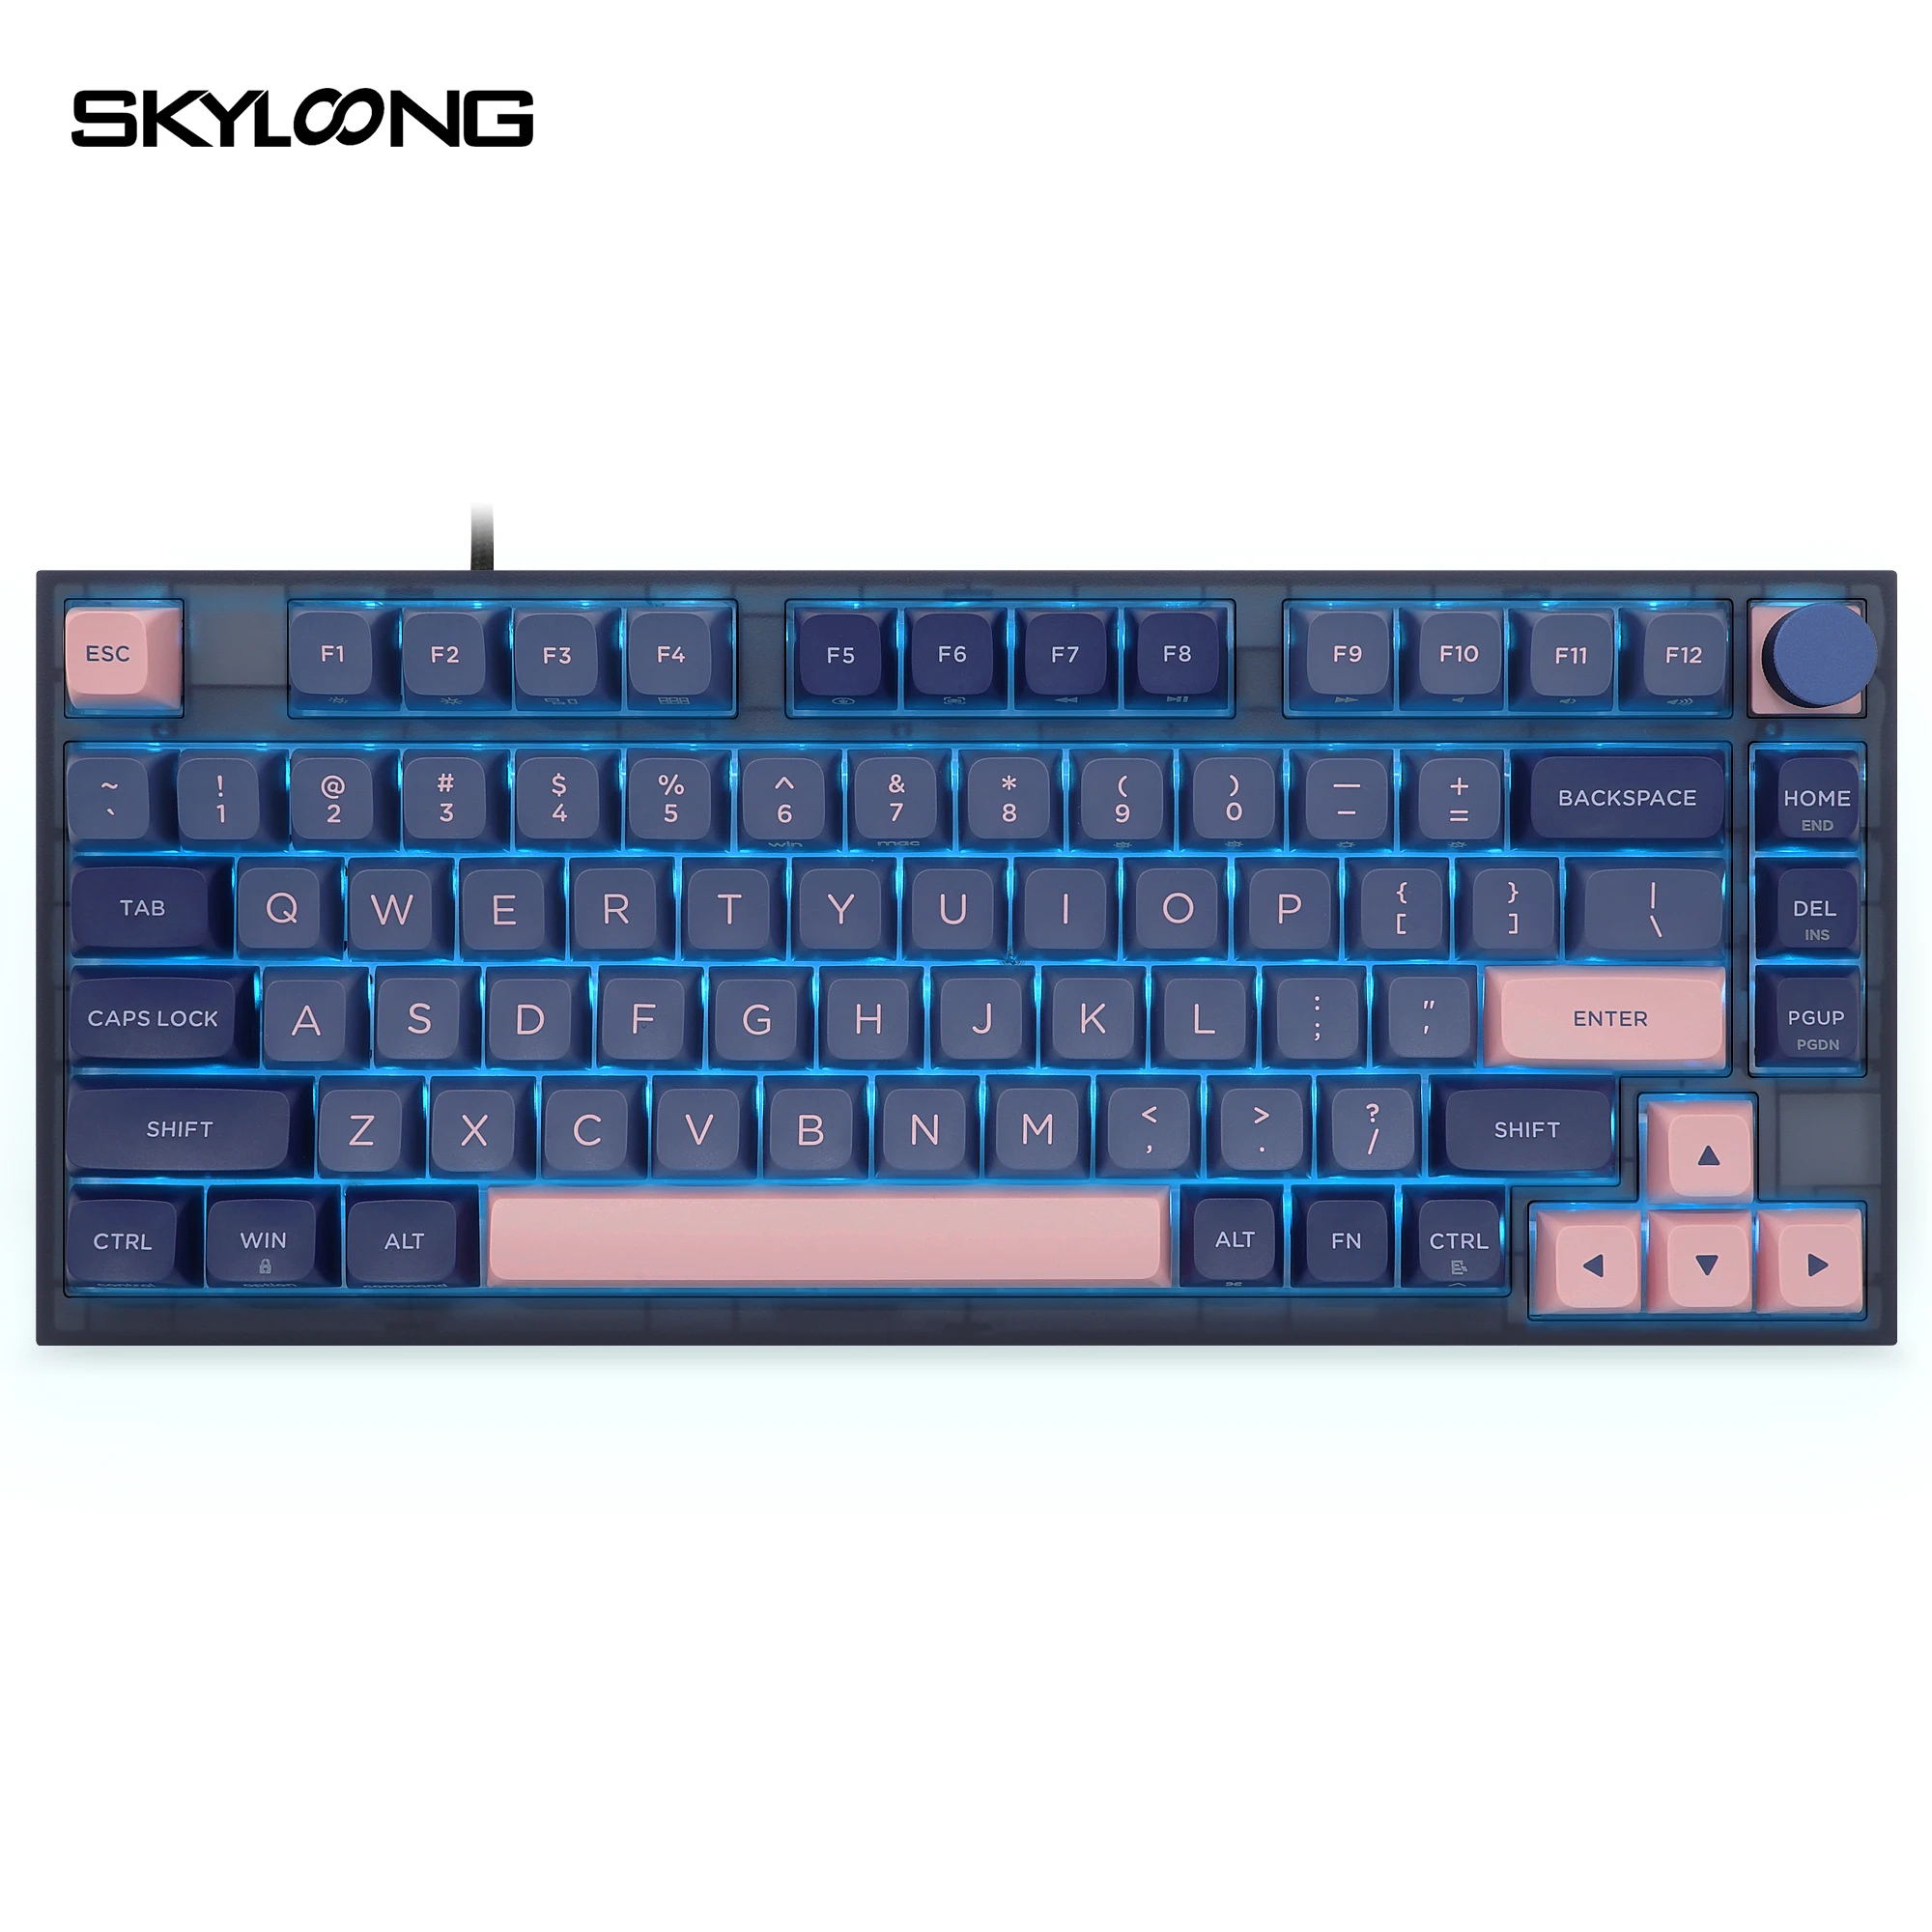 

SKYLOONG GK75 Lite Gasket-like Mount Wired Hot Swappable Optical Switch Programmable Mechanical Keyboard Knob Win/Mac Compatible